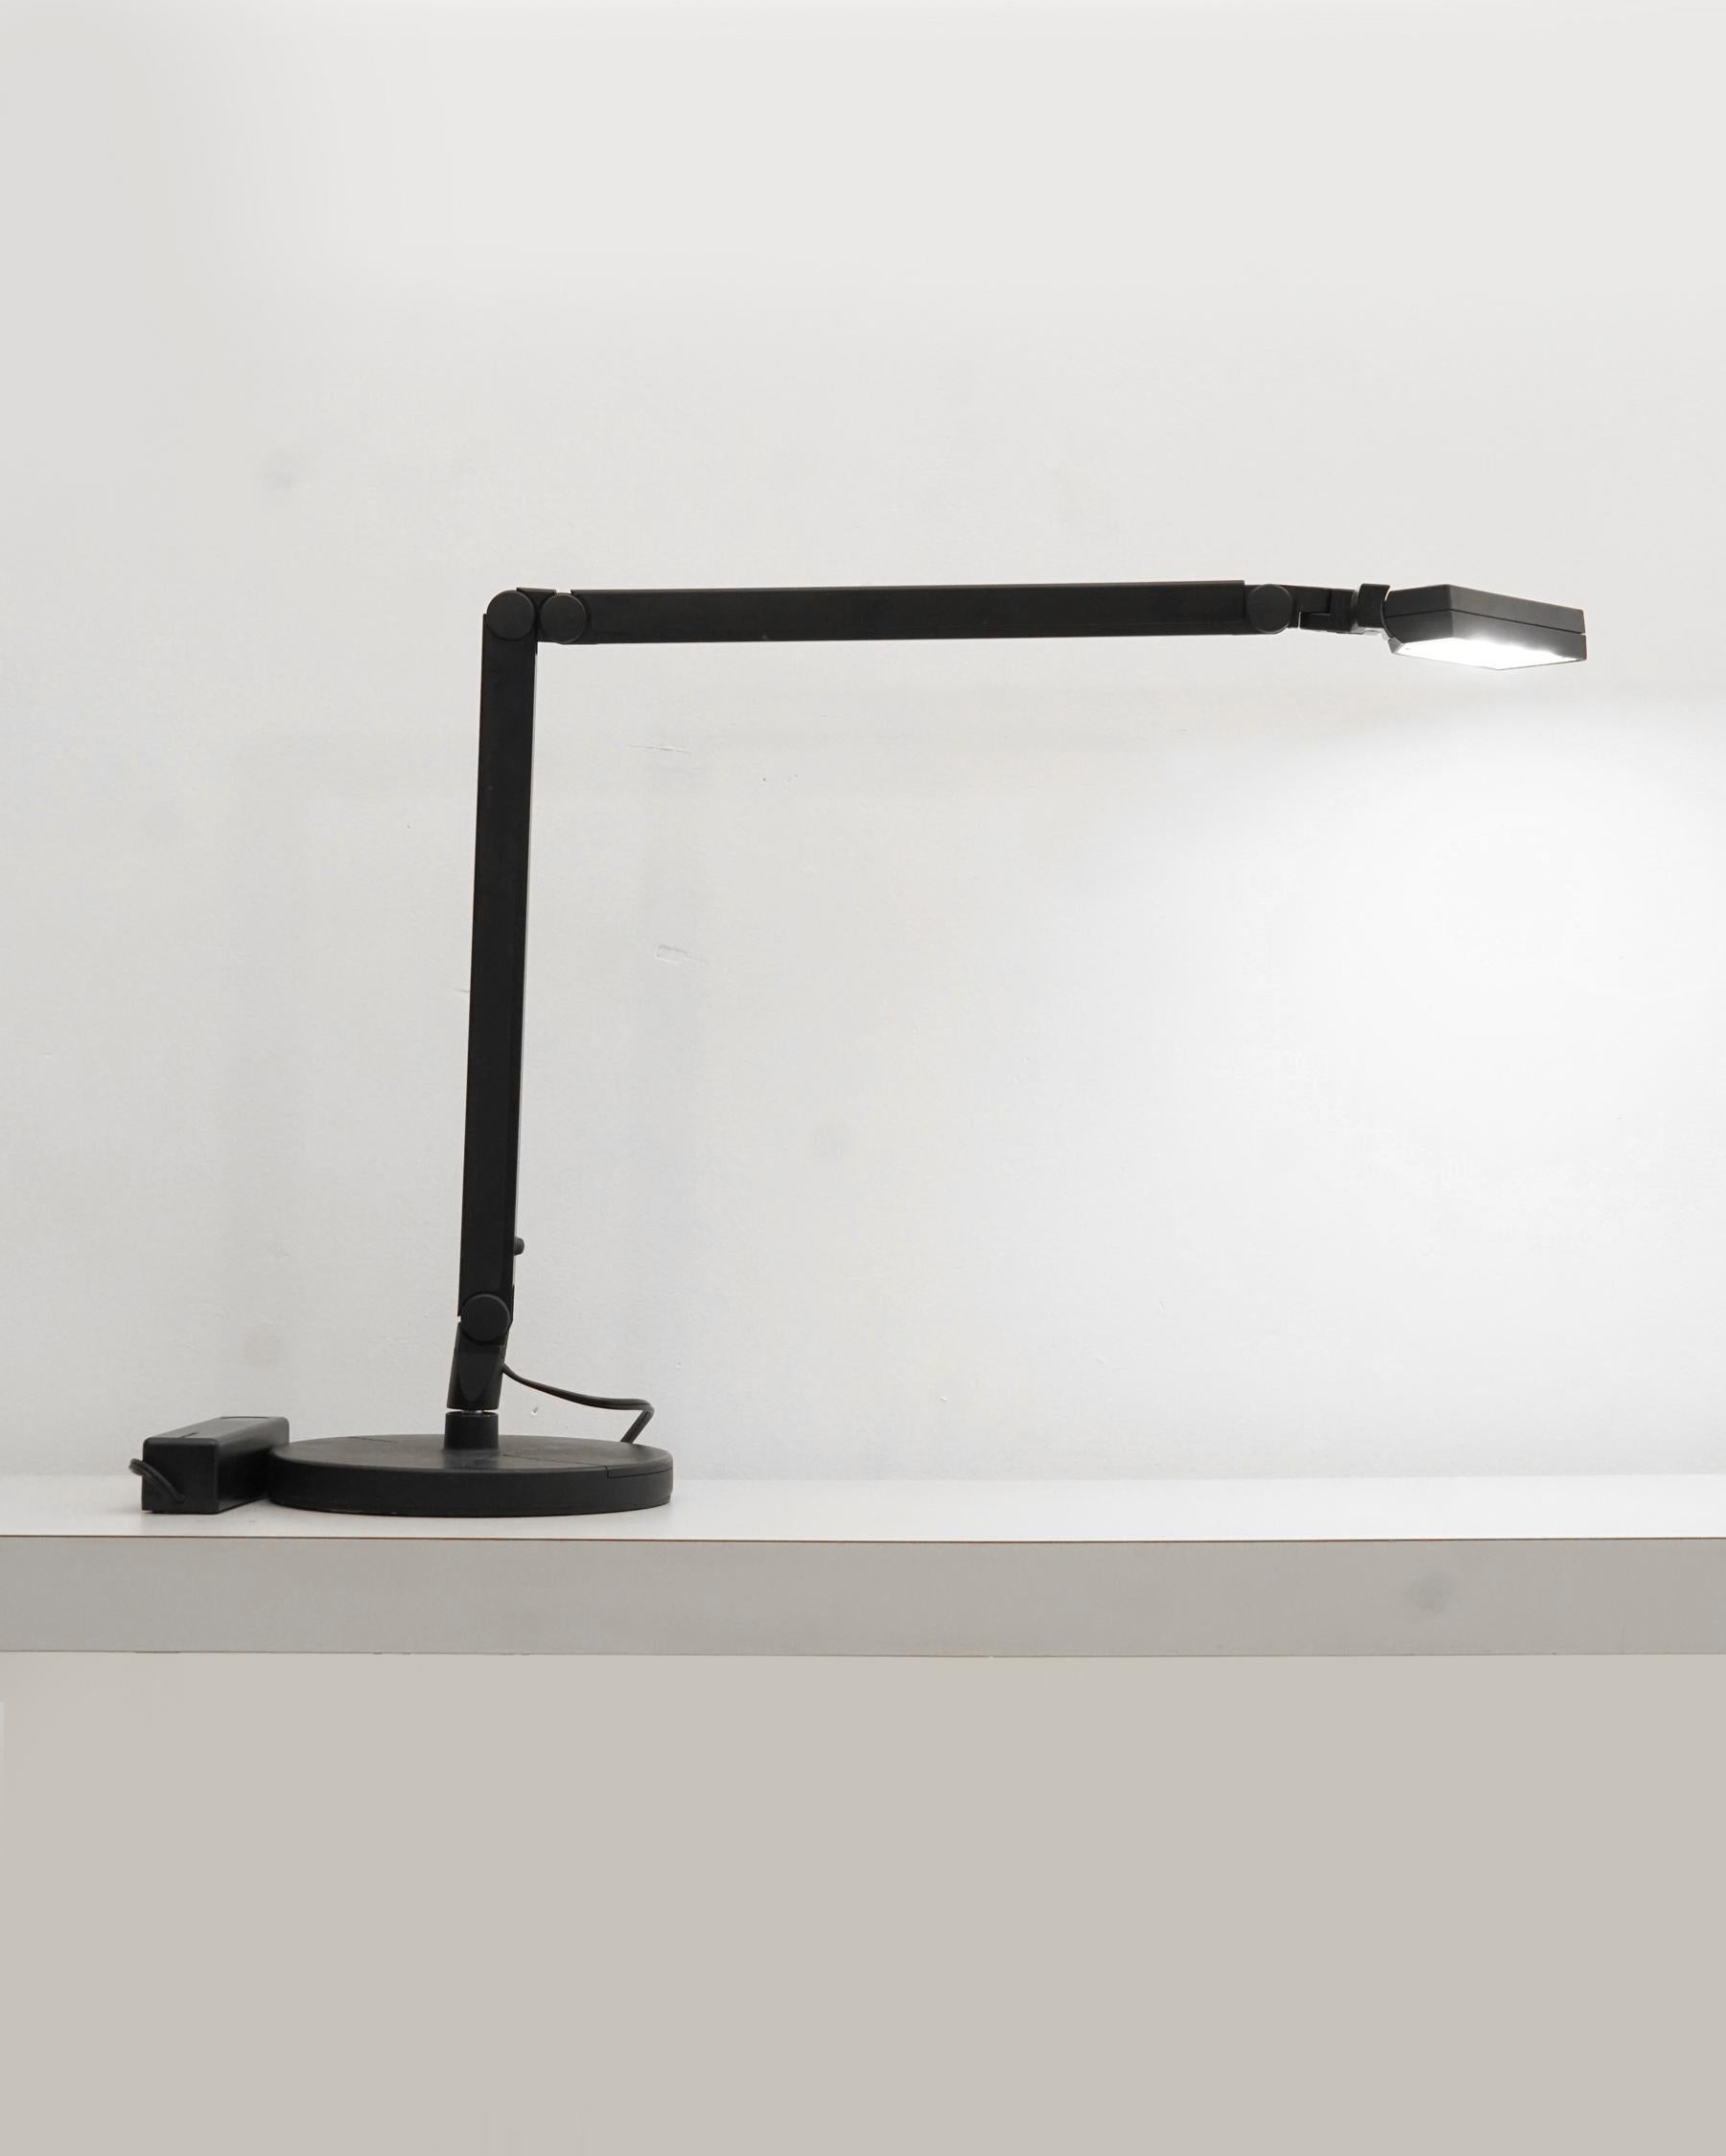 1980s black Lightolier desk lamp. Extremely heavy base. Some scratches and scuffs from age. The tension arm makes the lamp adjustable to many configurations. 